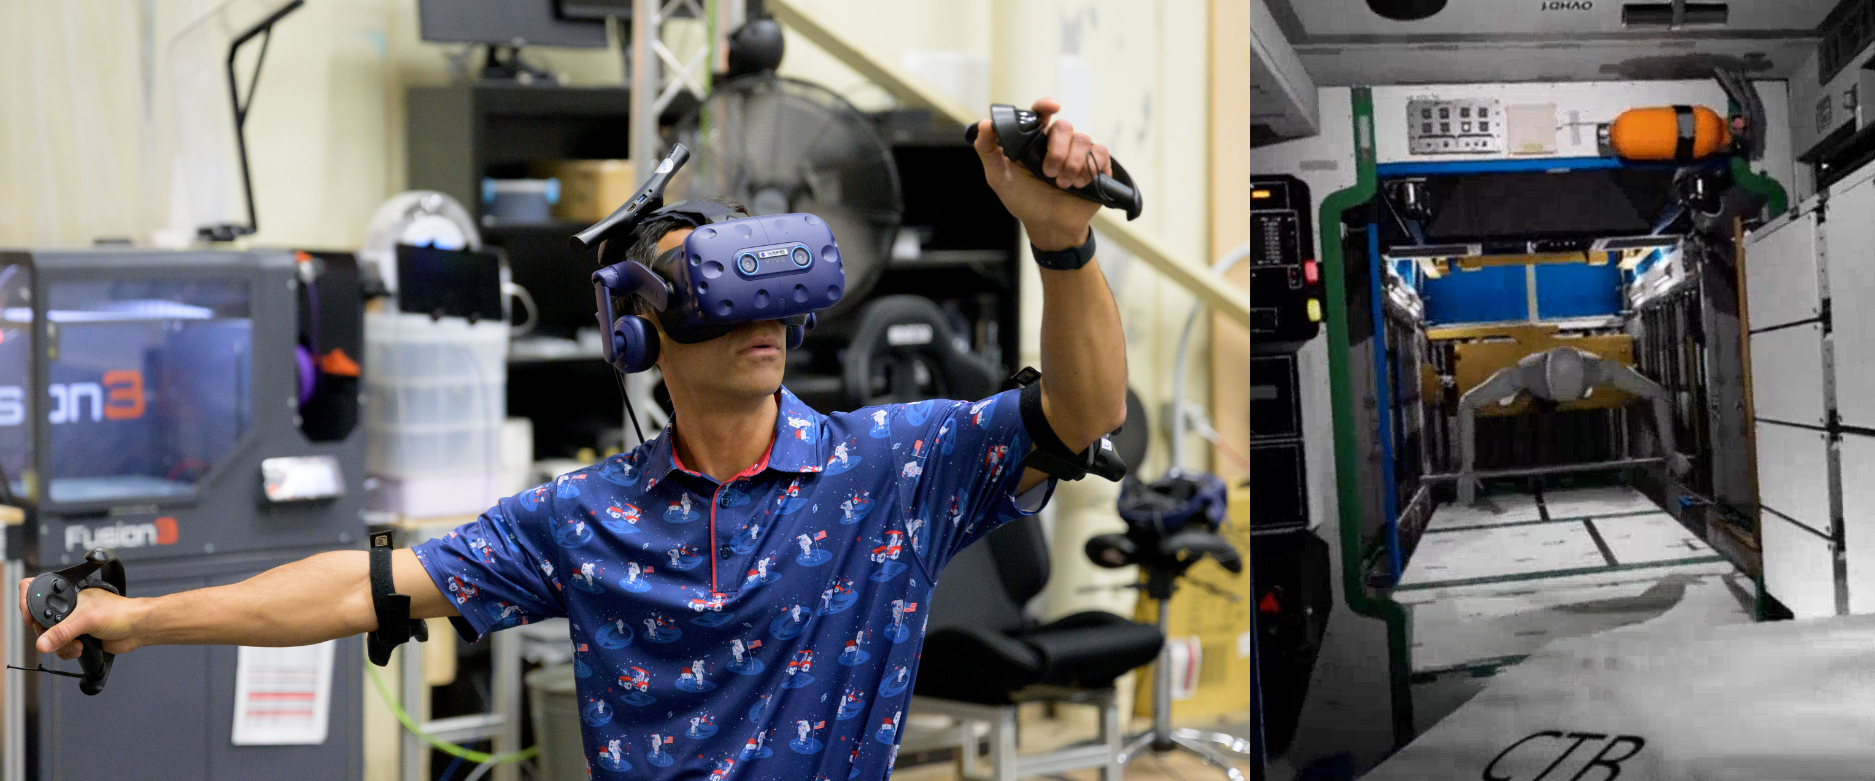 NASA Astronaut Raja Chari wearing a VR headset and holding VR controllers in both hands, with an image of the virtual reality simulation he is experiencing displayed next to him. The simulation shows the interior of Gateway, as Chari navigates through the virtual environment during a testing session at NASA's Johnson Space Center's Virtual Reality Training Lab.